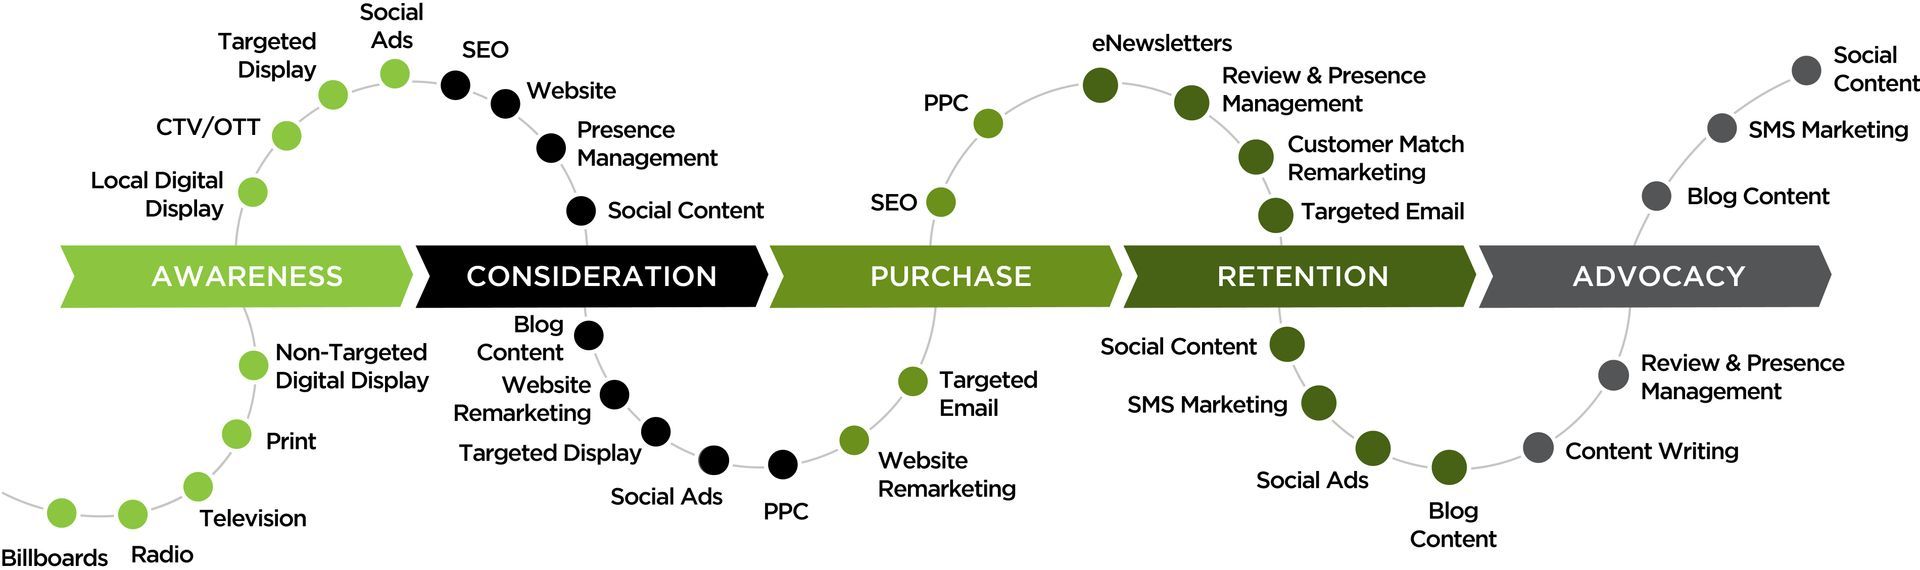 a diagram showing the stages of a omni-channel digital marketing touch points